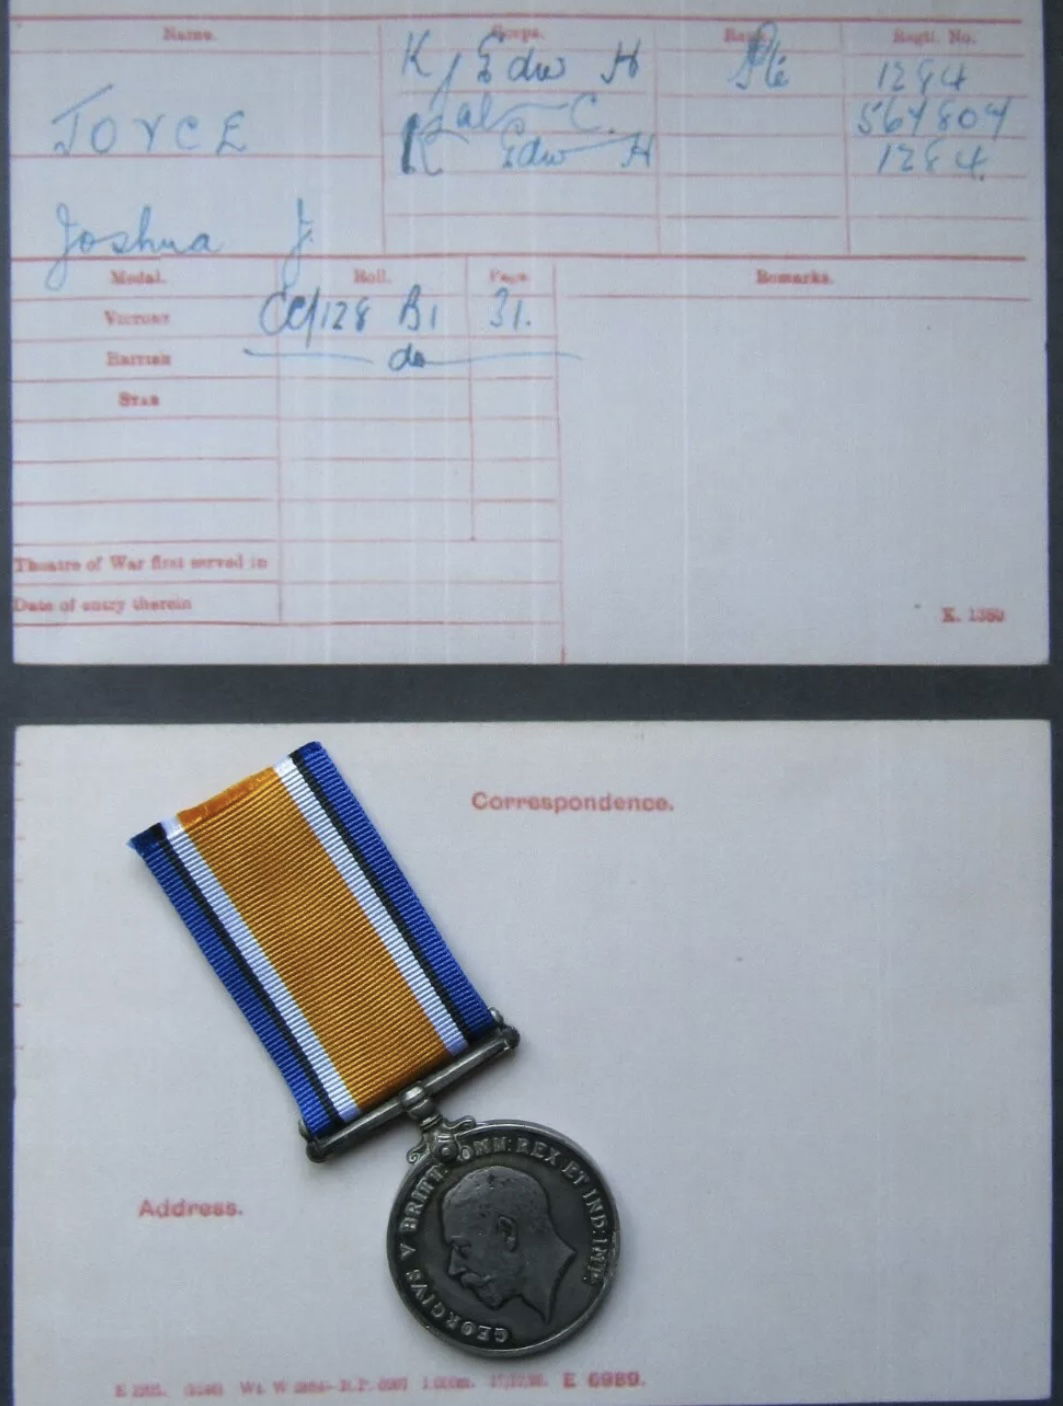 JOYCE, Joshua J. Private, 1284. British War Medal with Medal Index Card sold at auction. If you are the owner of this medal please contact me as a private collector in the UK has Private Joyce's Victory Medal so that they could hopefully be re-united.